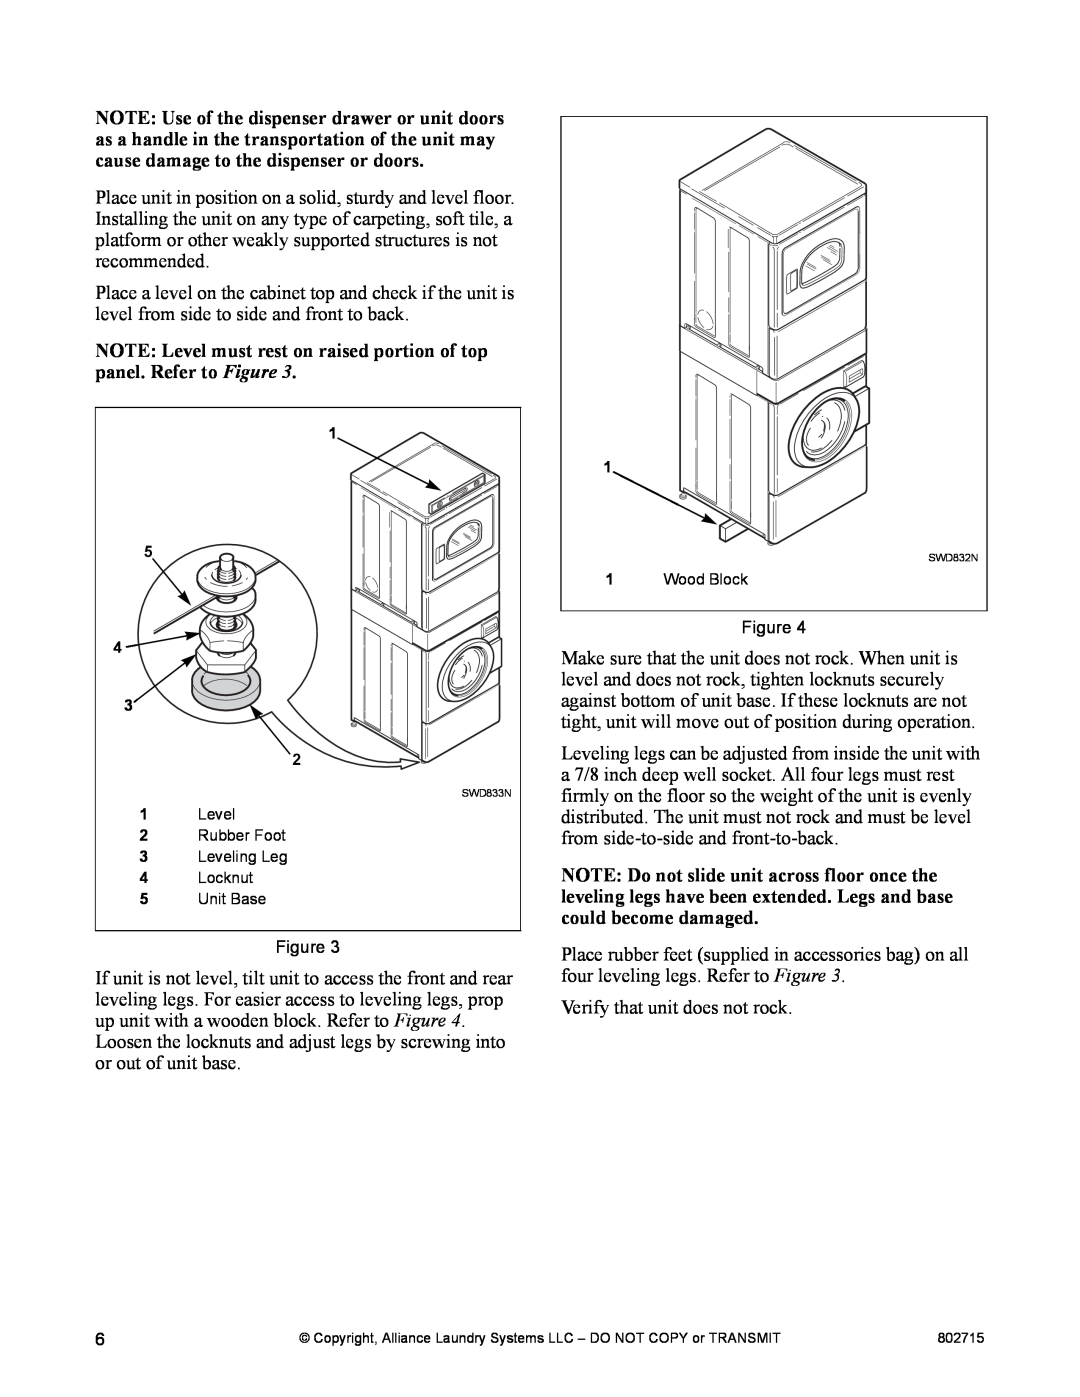 Alliance Laundry Systems Dishwasher manual NOTE Level must rest on raised portion of top panel. Refer to Figure 